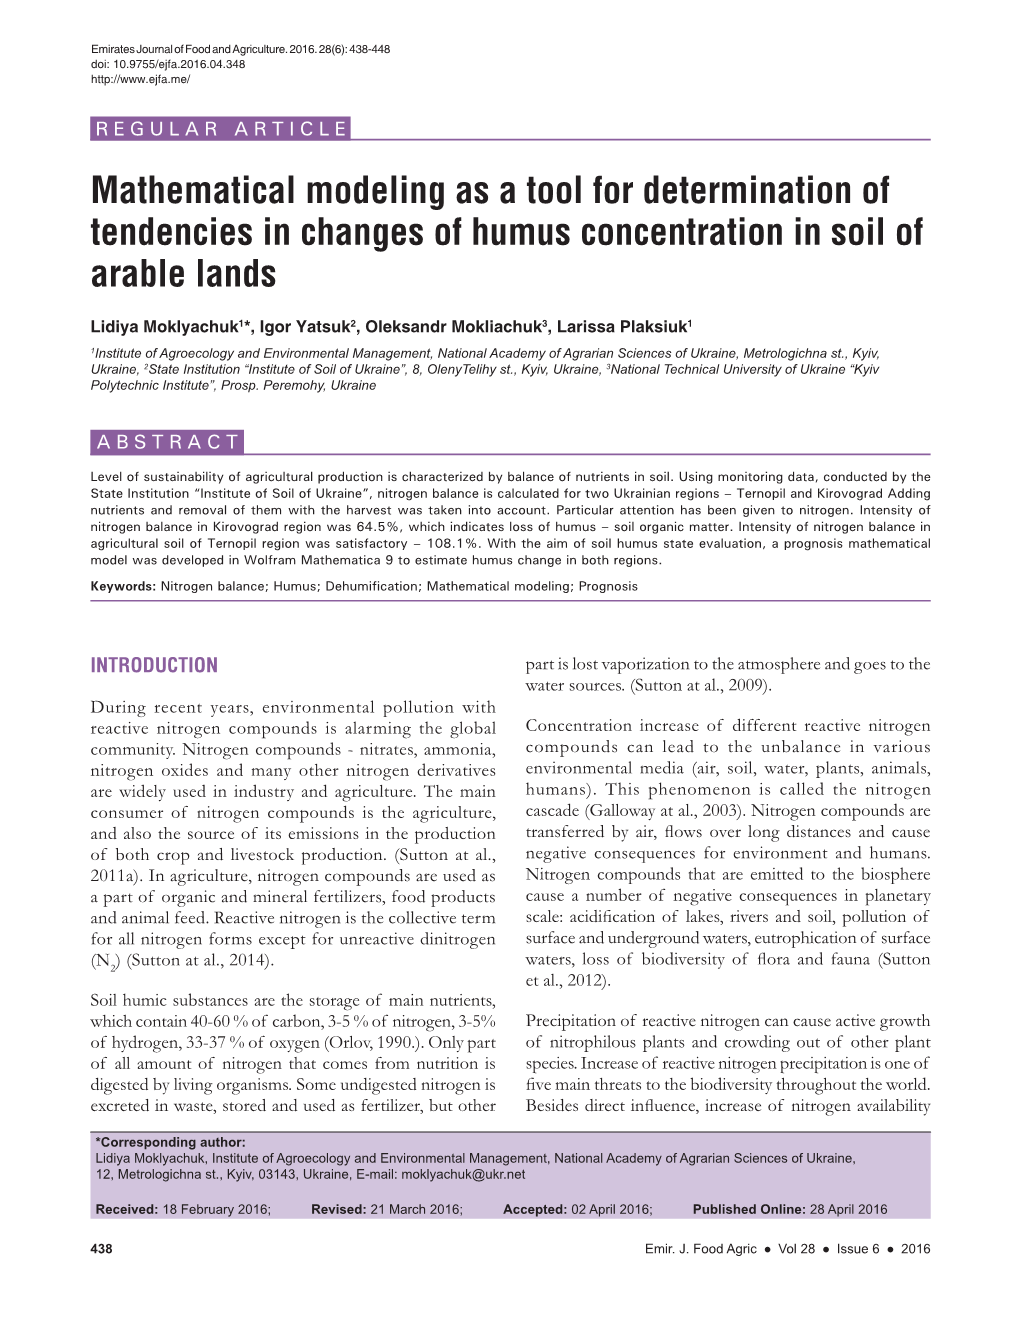 Mathematical Modeling As a Tool for Determination of Tendencies in Changes of Humus Concentration in Soil of Arable Lands